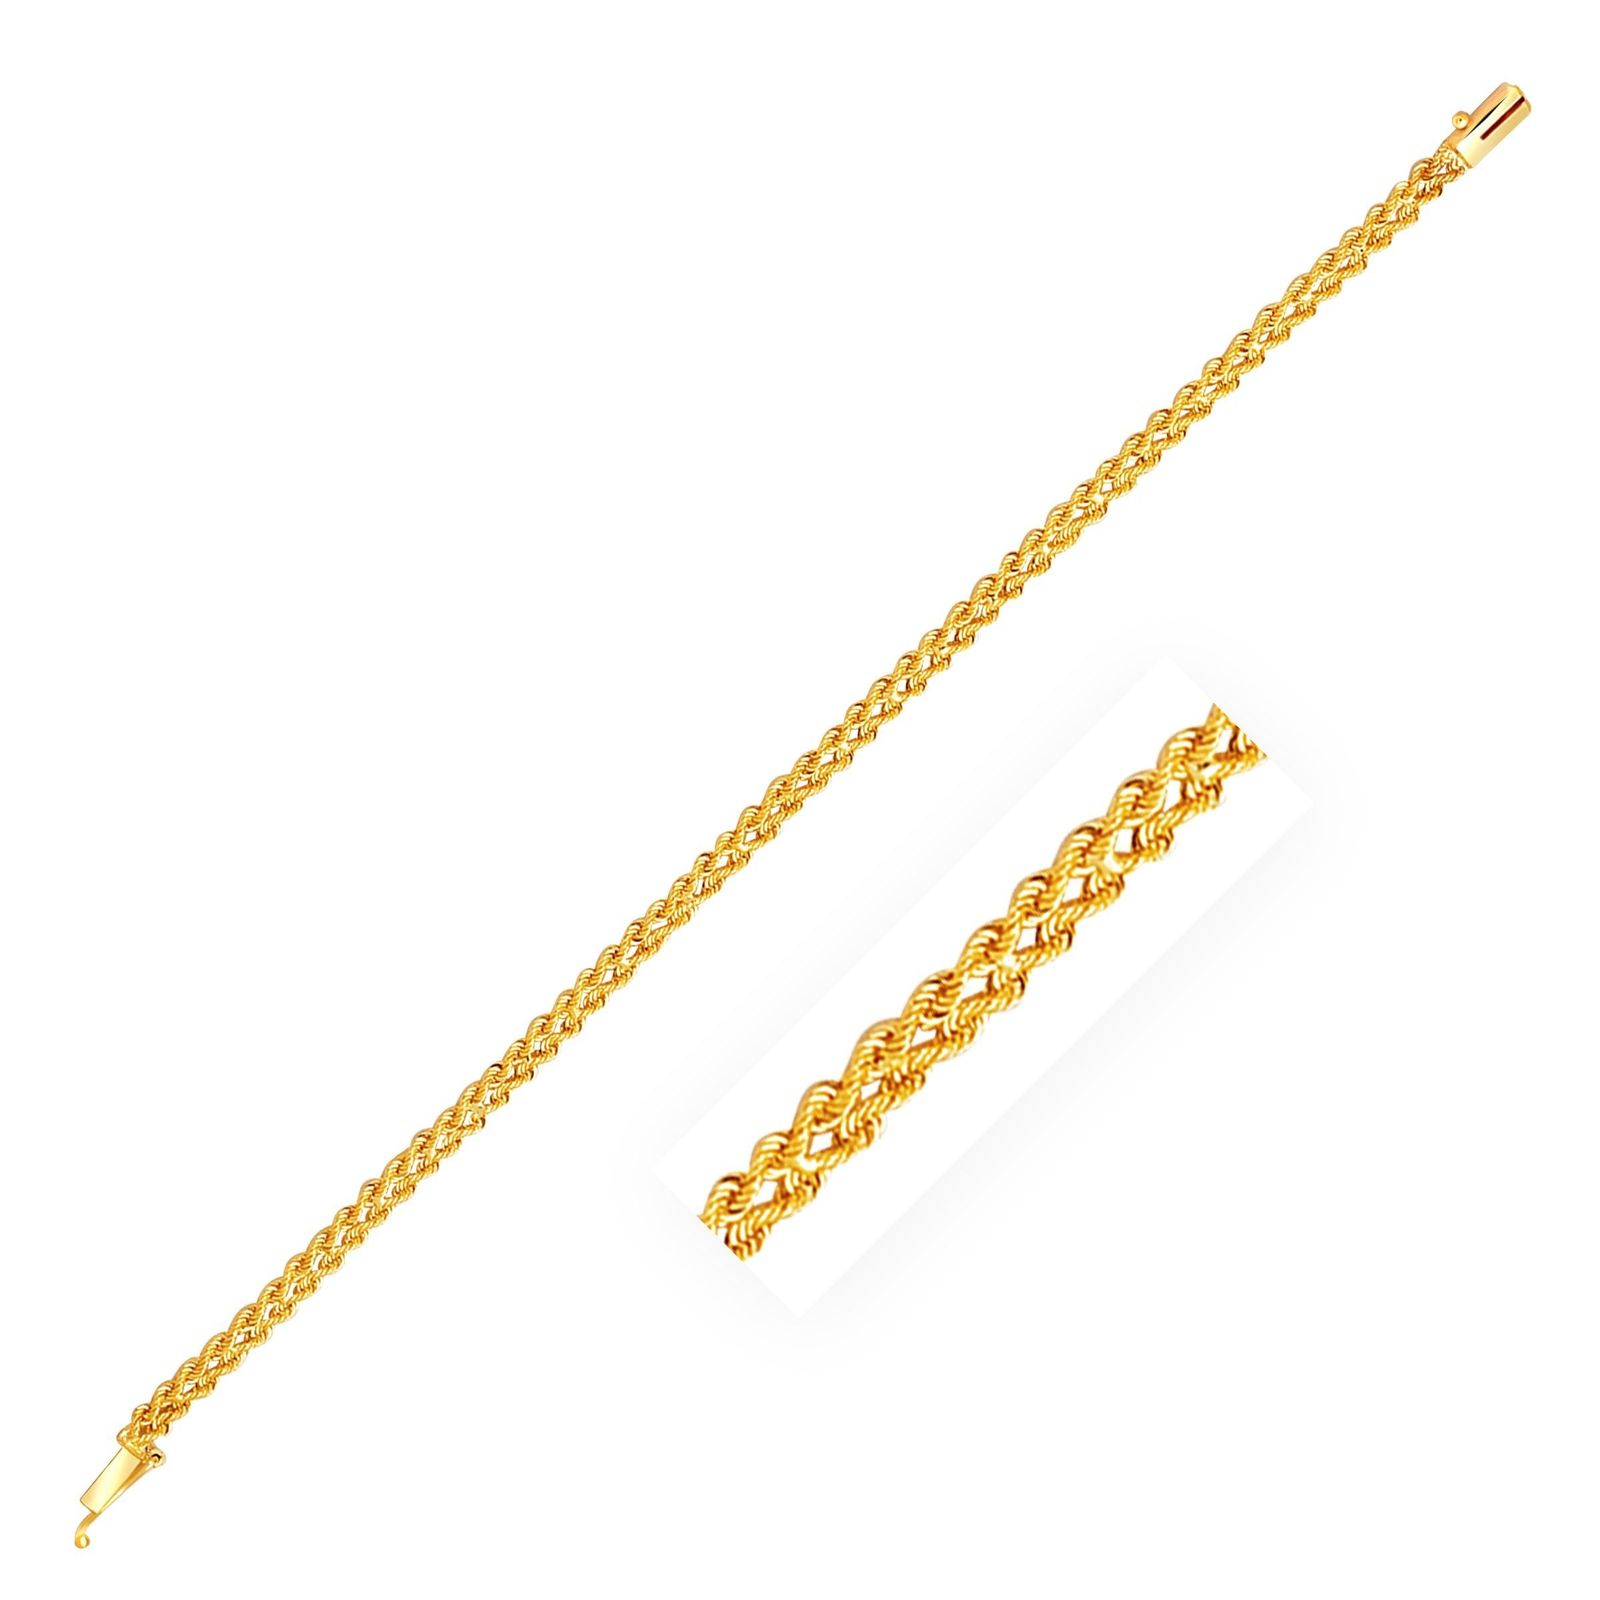 4.0 mm 14k Yellow Gold Two Row Rope Bracelet, size 8''